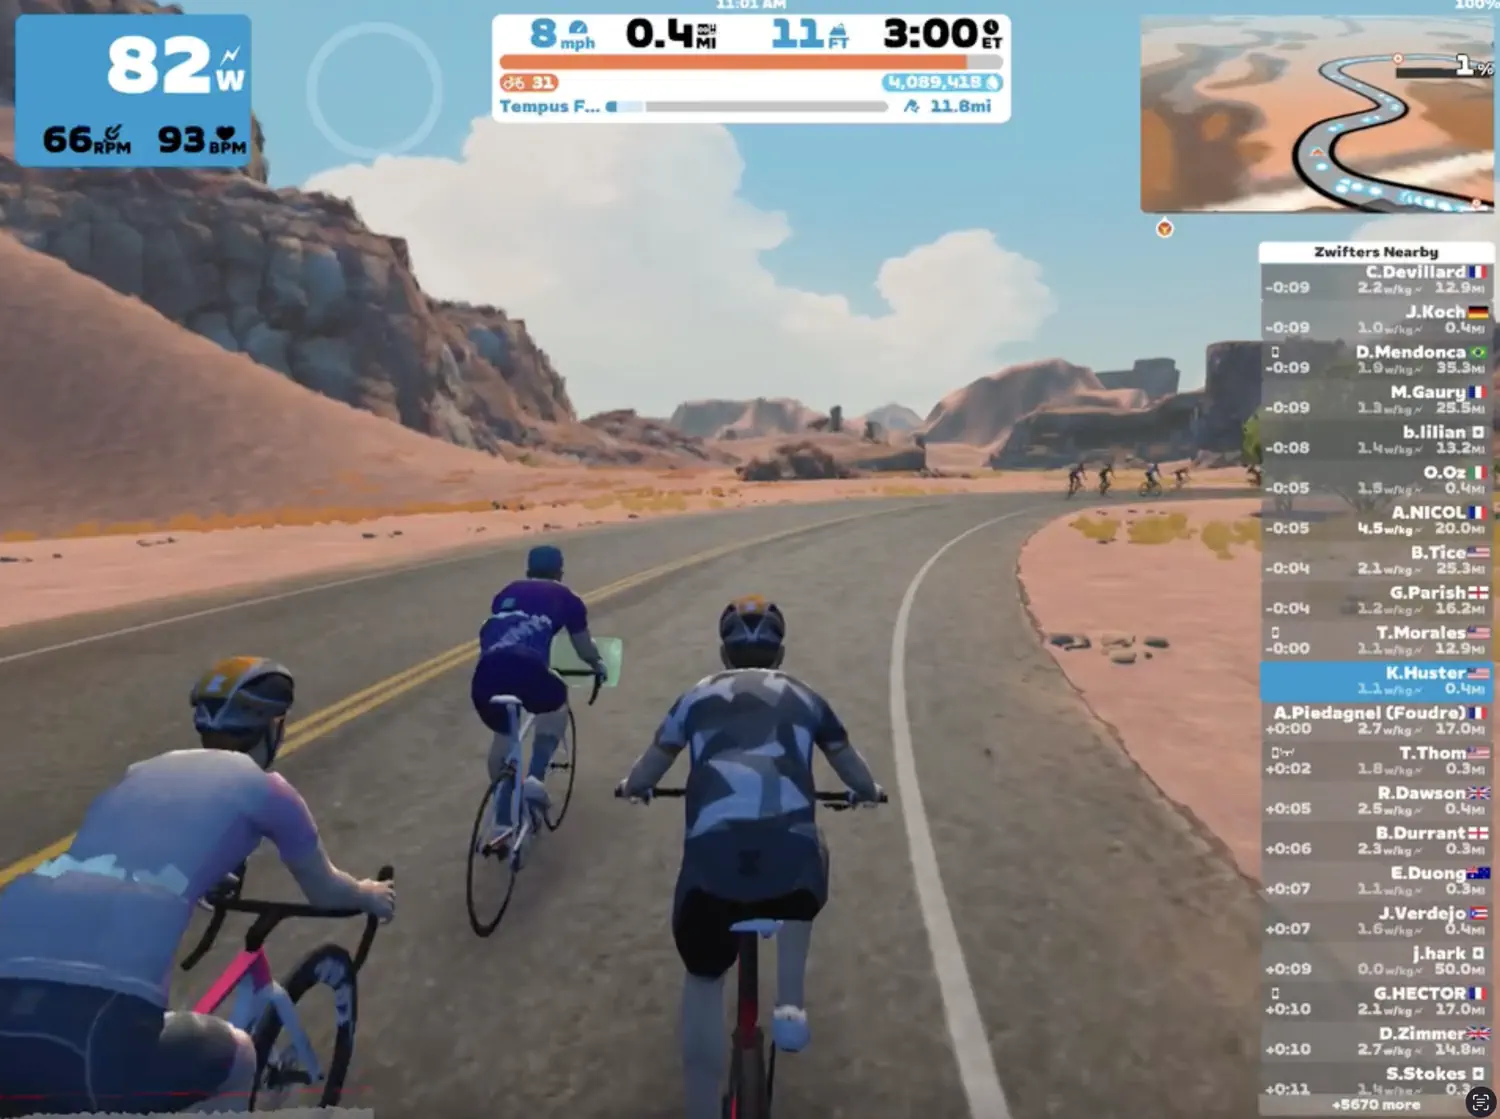 Keith is completing a 30-minute training ride on Zwift